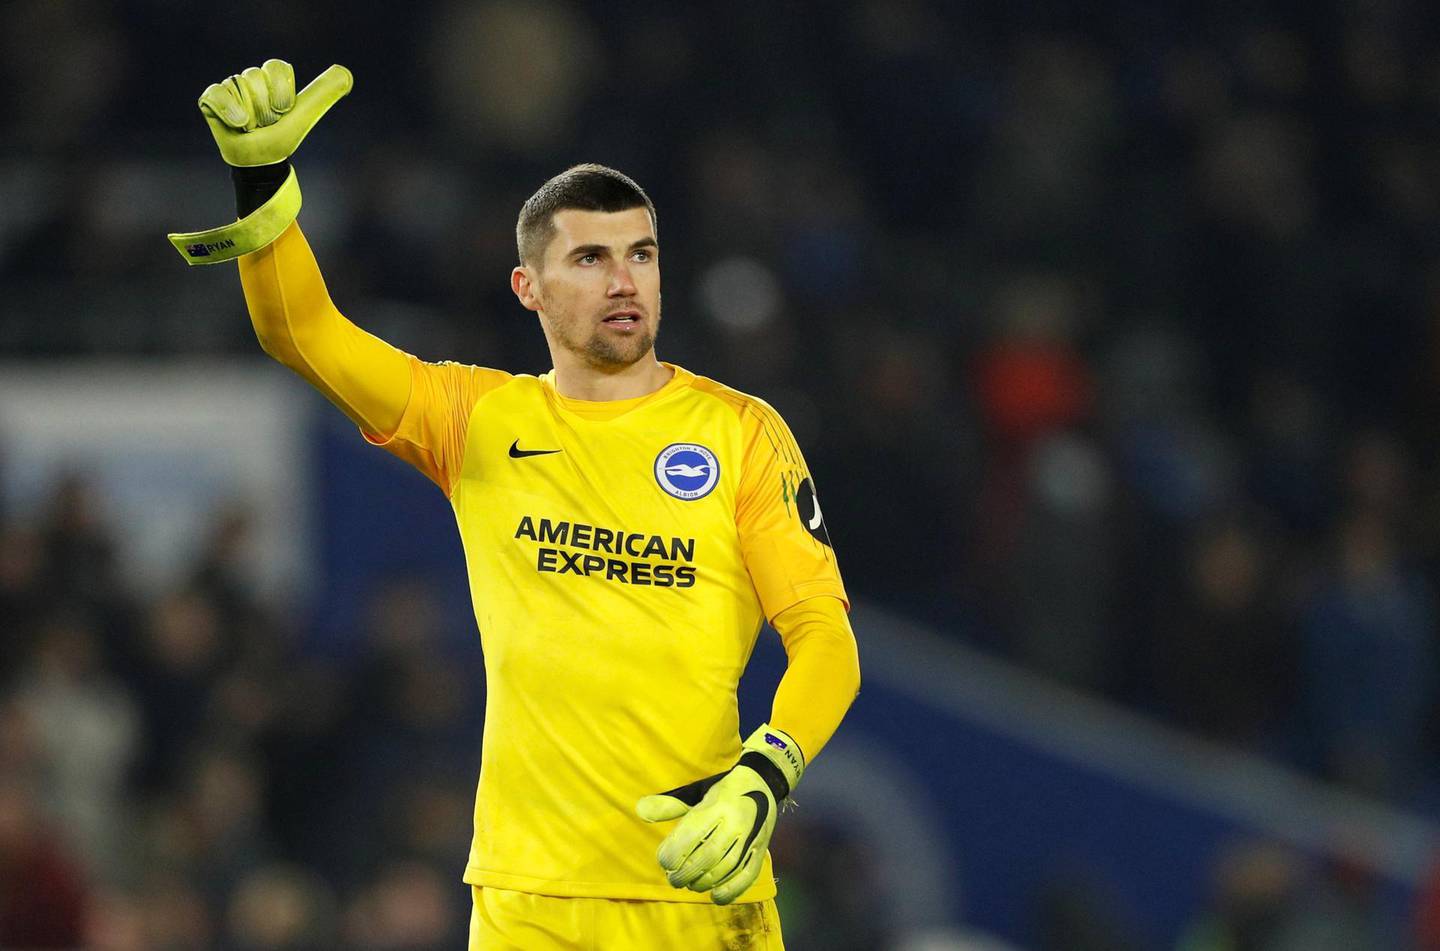 Soccer Football - Premier League - Brighton & Hove Albion v Arsenal - The American Express Community Stadium, Brighton, Britain - December 26, 2018  Brighton's Mathew Ryan celebrates at the end of the match   Action Images via Reuters/John Sibley  EDITORIAL USE ONLY. No use with unauthorized audio, video, data, fixture lists, club/league logos or "live" services. Online in-match use limited to 75 images, no video emulation. No use in betting, games or single club/league/player publications.  Please contact your account representative for further details.